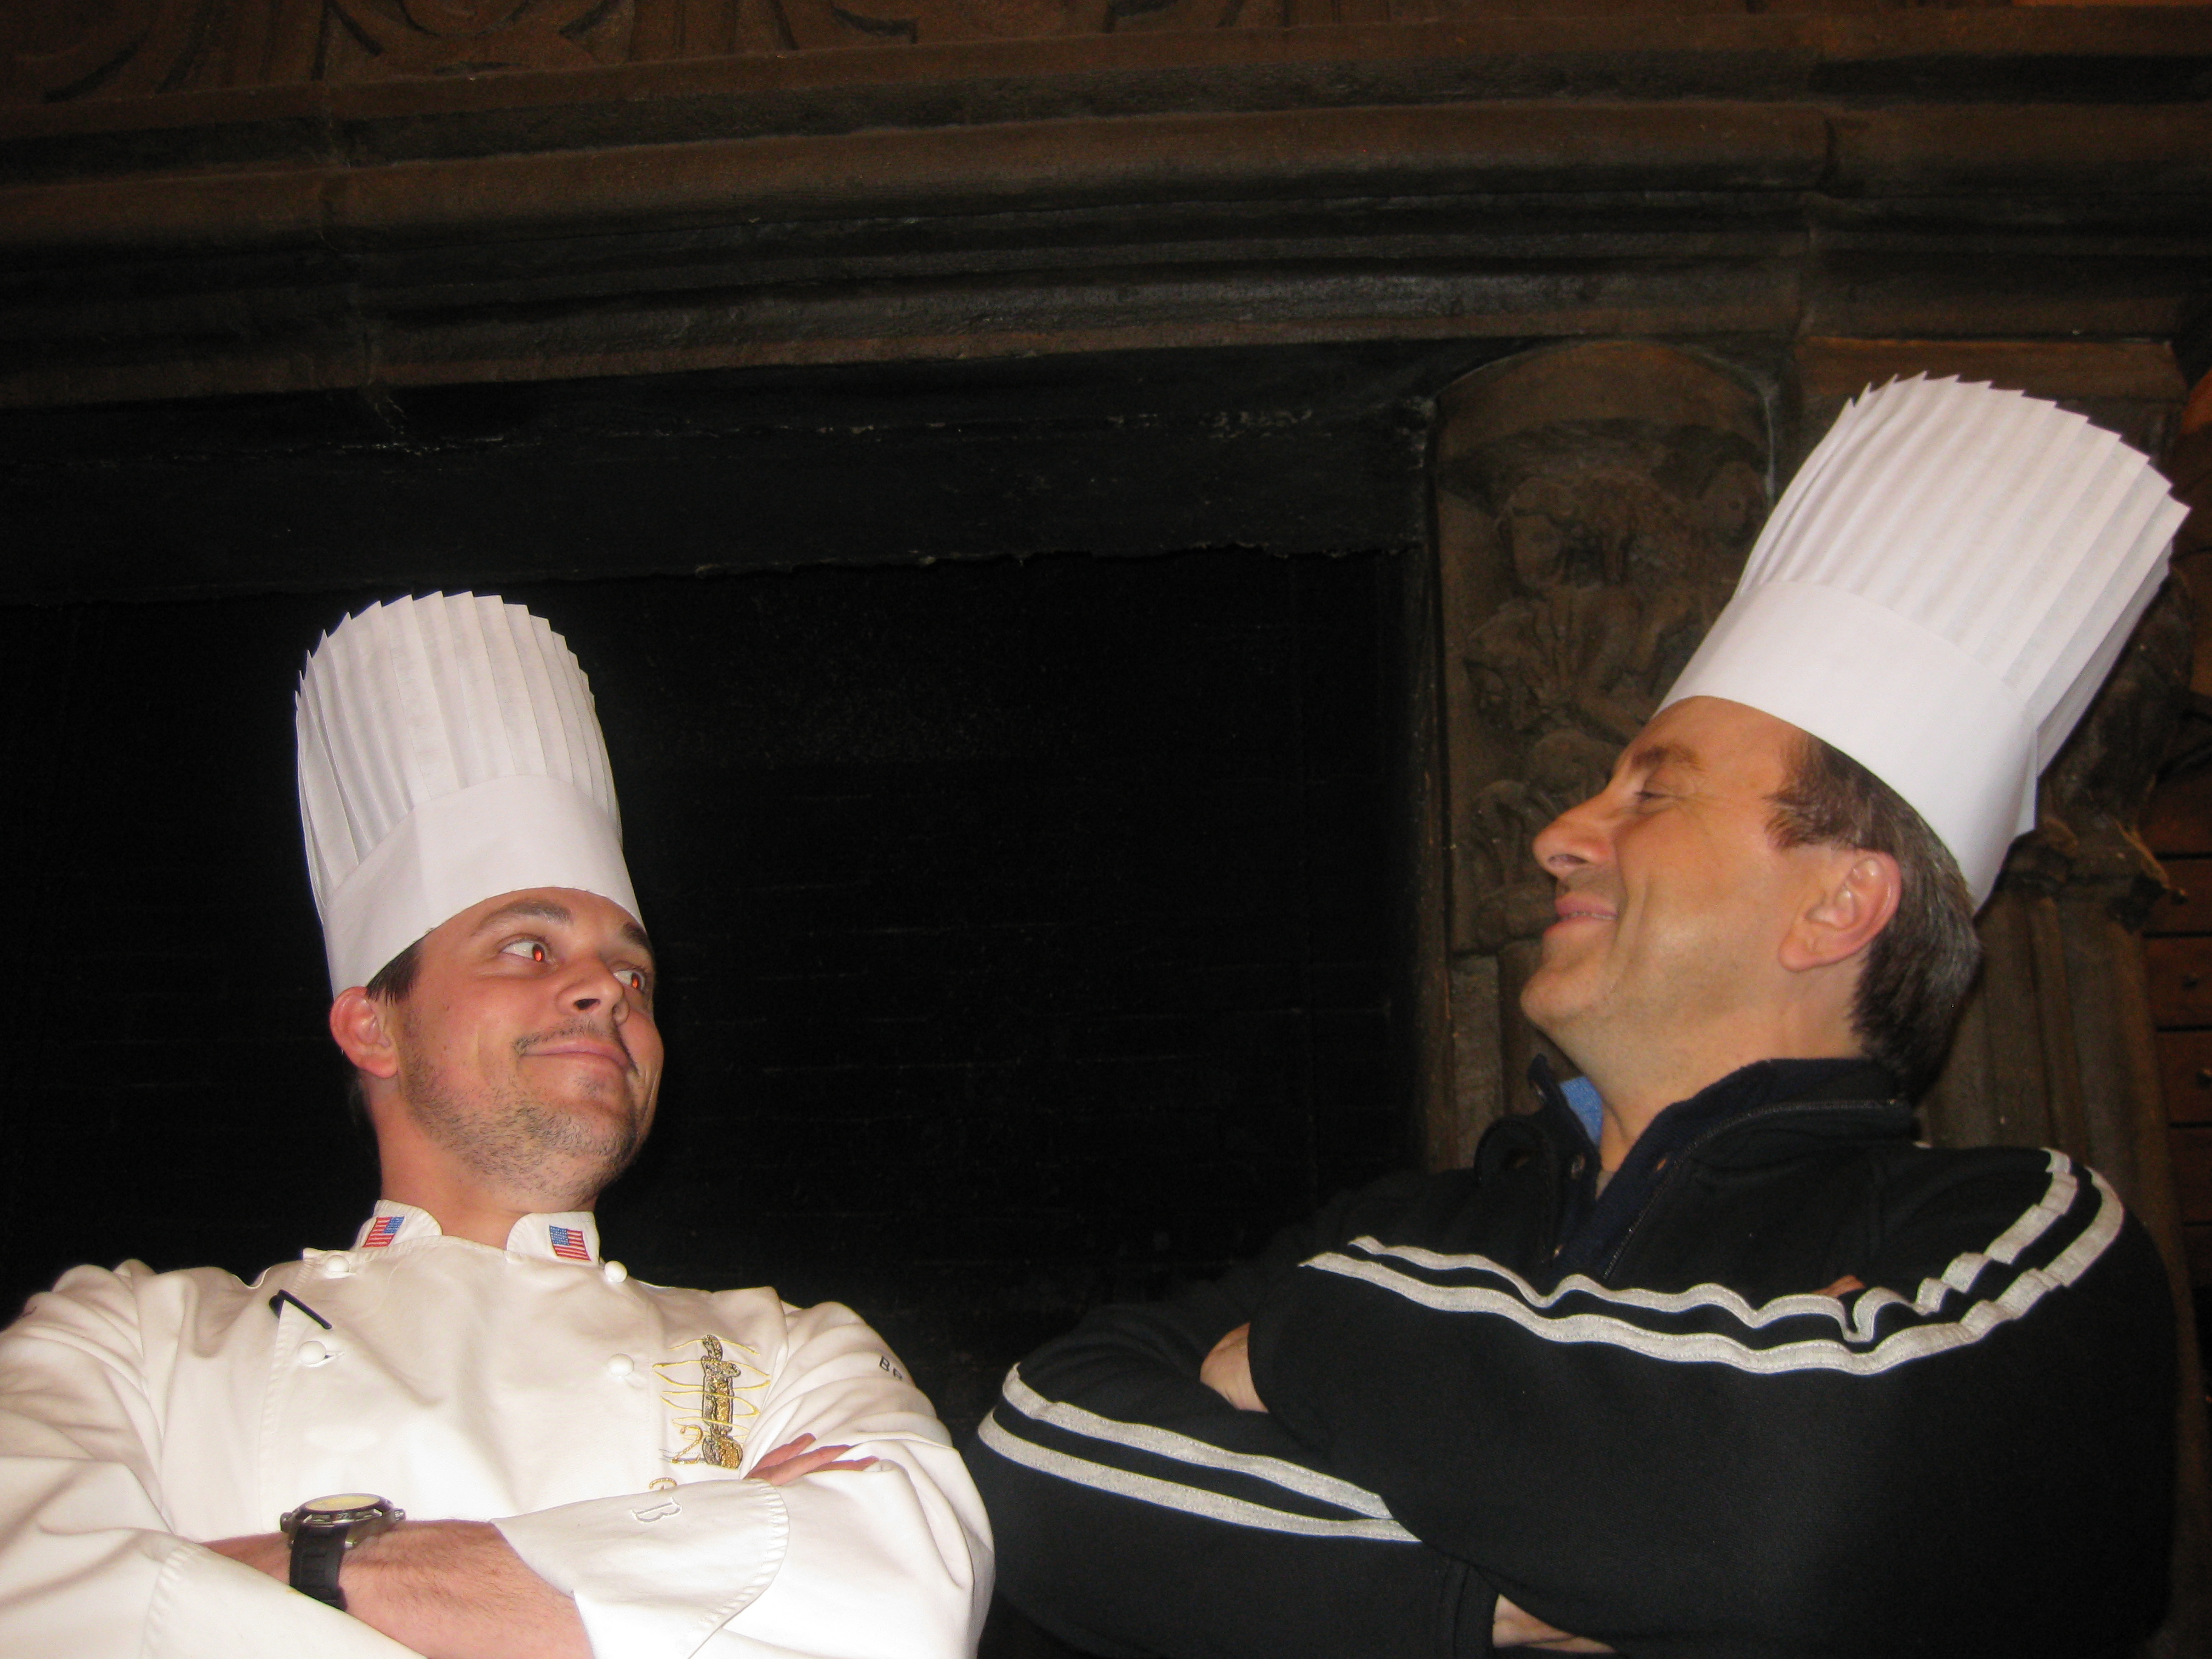 Gavin Kaysen shares a light moment with Daniel Boulud in Lyon.  January 2009. (photo © Table 12 Productions, Inc.)